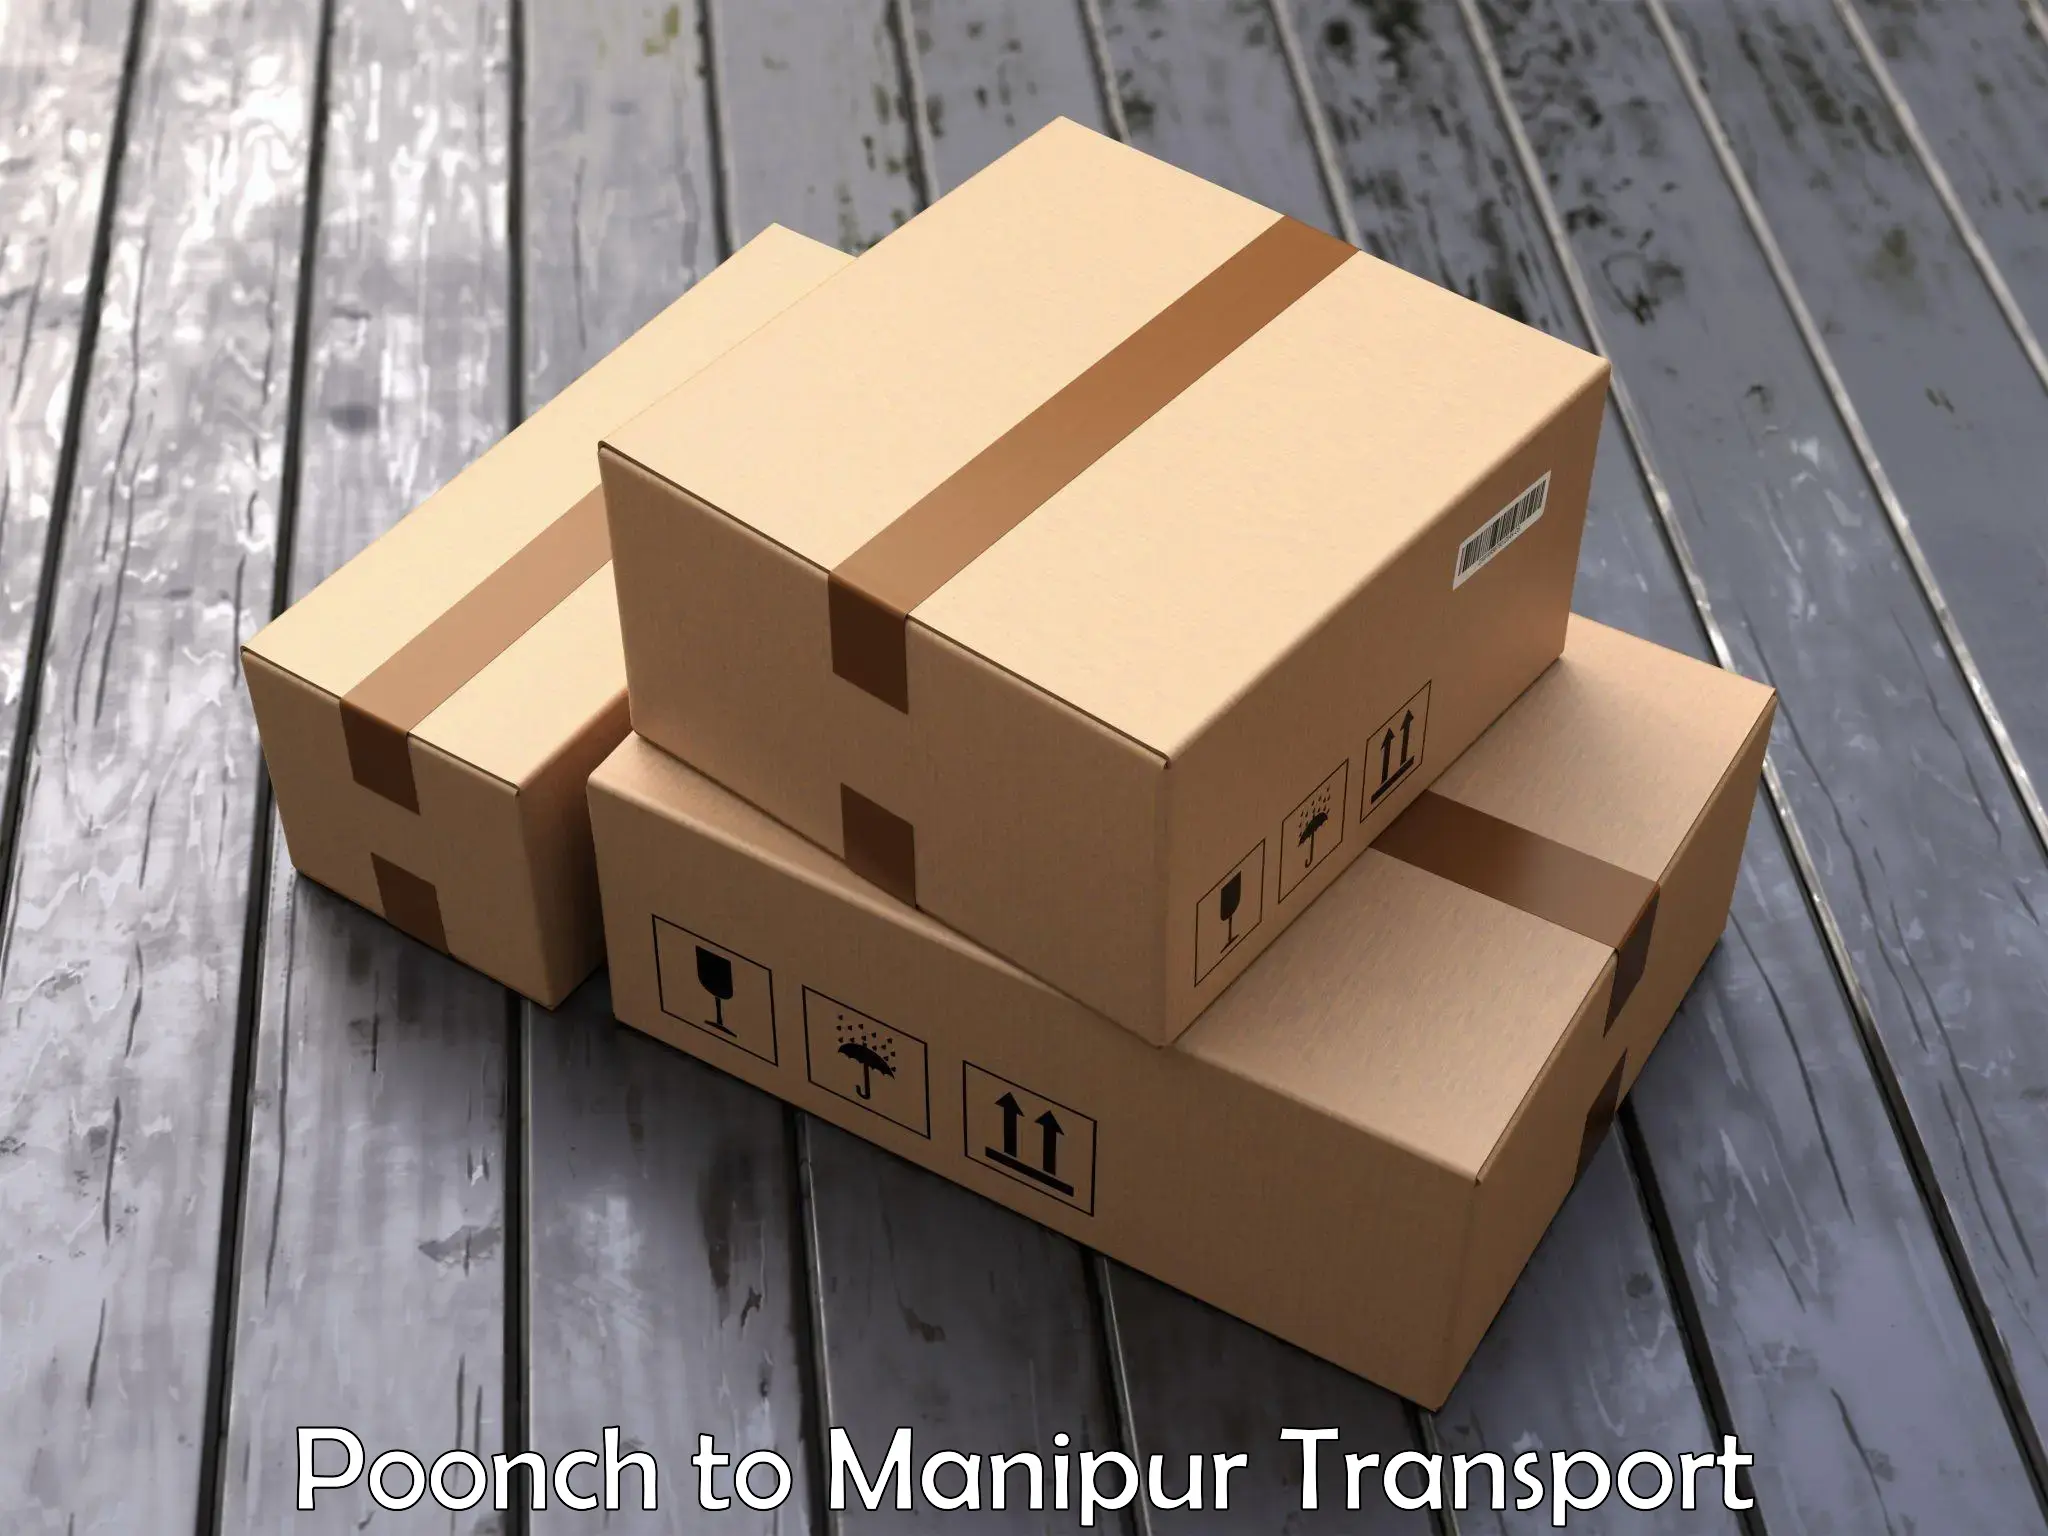 Daily transport service Poonch to Manipur